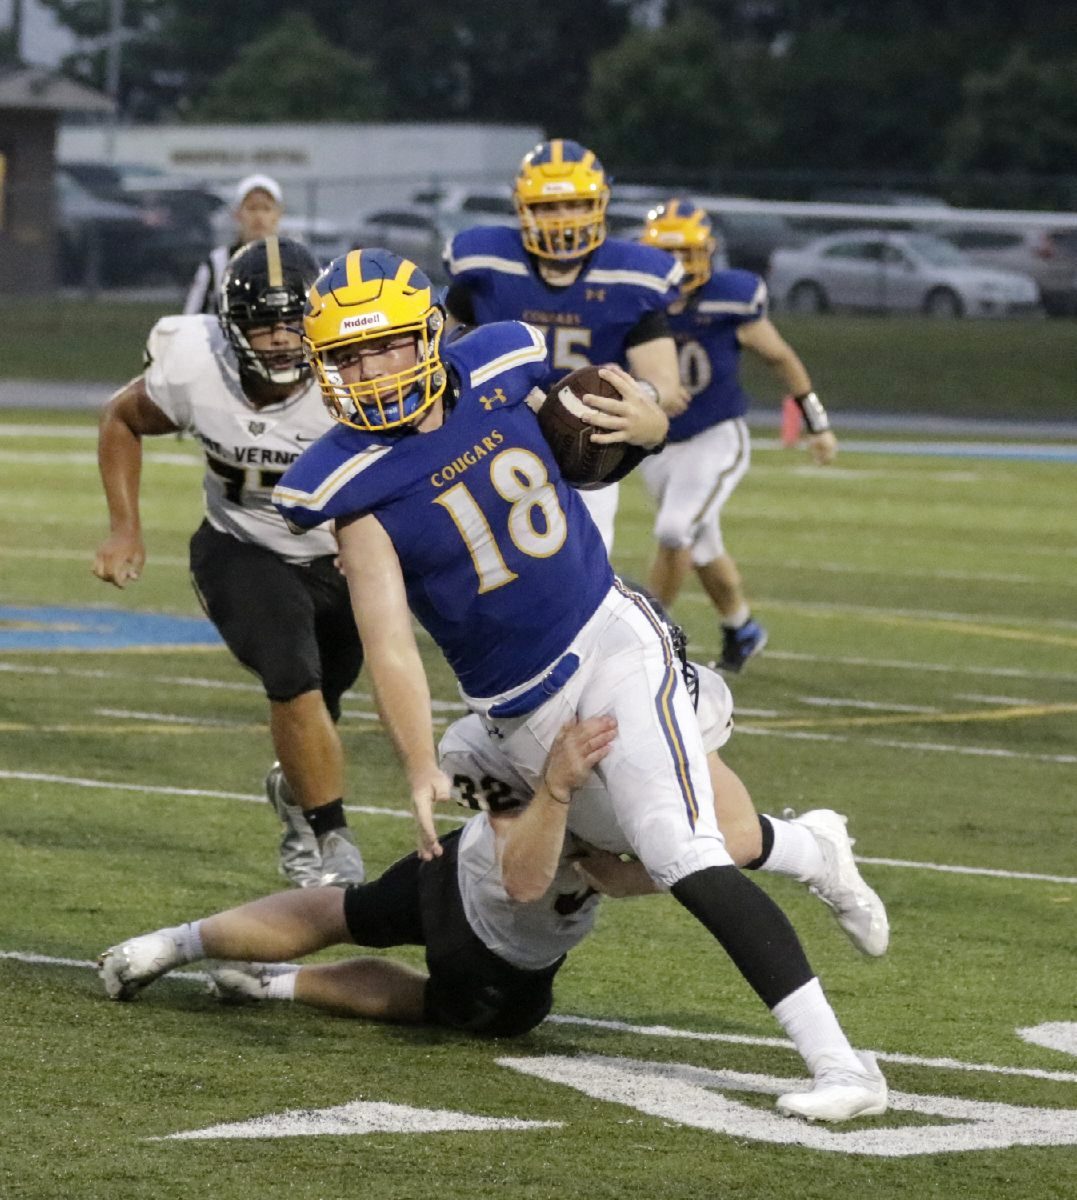 Mt. Vernon's Keagan La Belle (32) makes a sliding tackle on Greenfield-Central's Brodie Mayberry (18) before he can get around the corner on Saturday, Sept. 4, 2021. (Rob Baker/Daily Reporter)